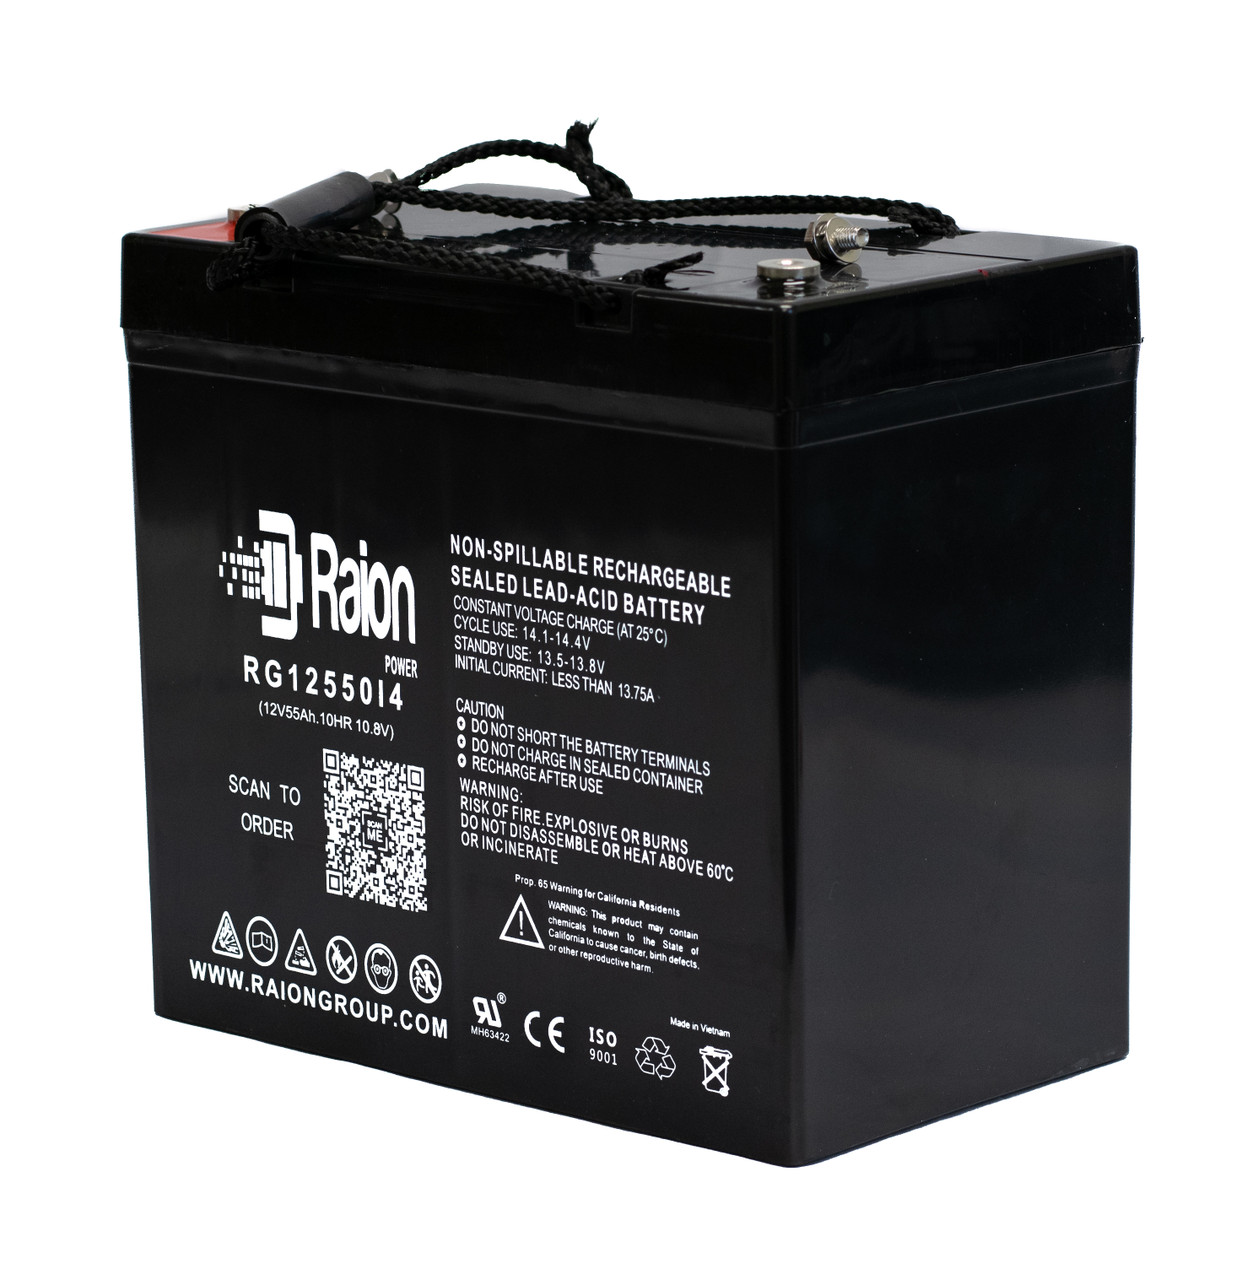 Raion Power 12V 55Ah 22NF Mobility Scooter Battery Replacement for Golden Technology Atlantic GP-201-F